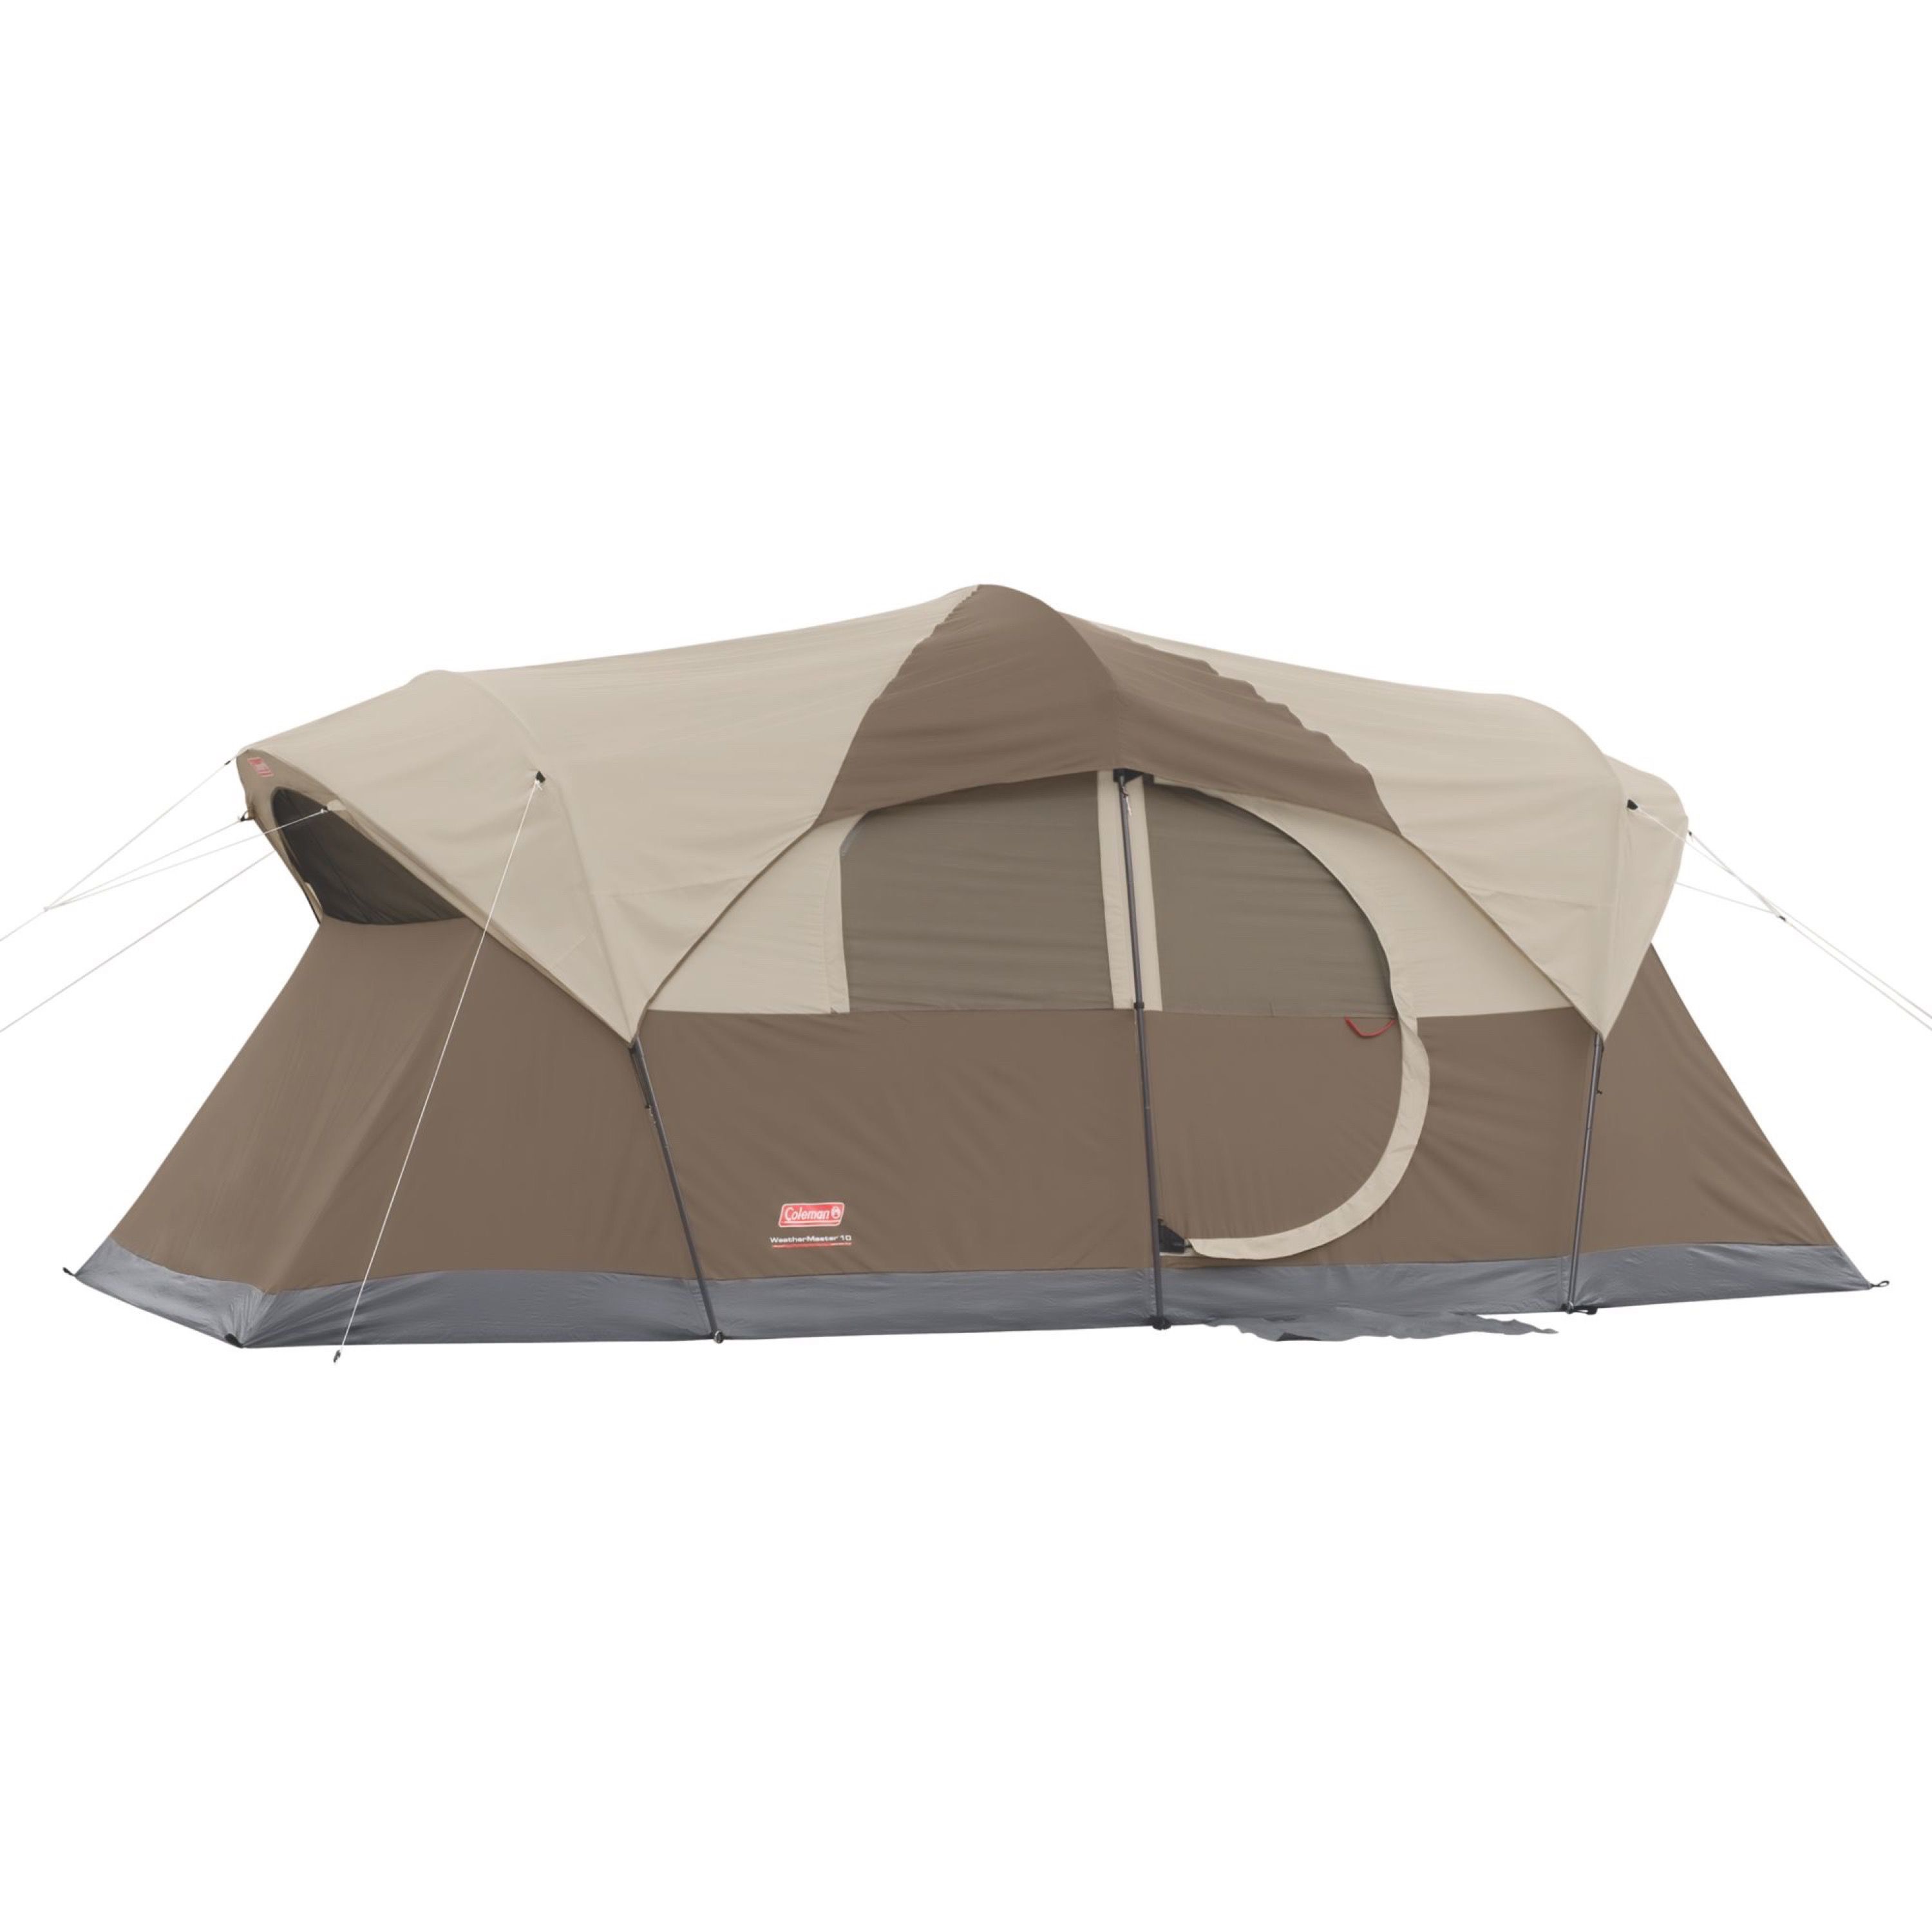 Coleman WeatherMaster 10 Person Tent with Room Divider - image 1 of 7